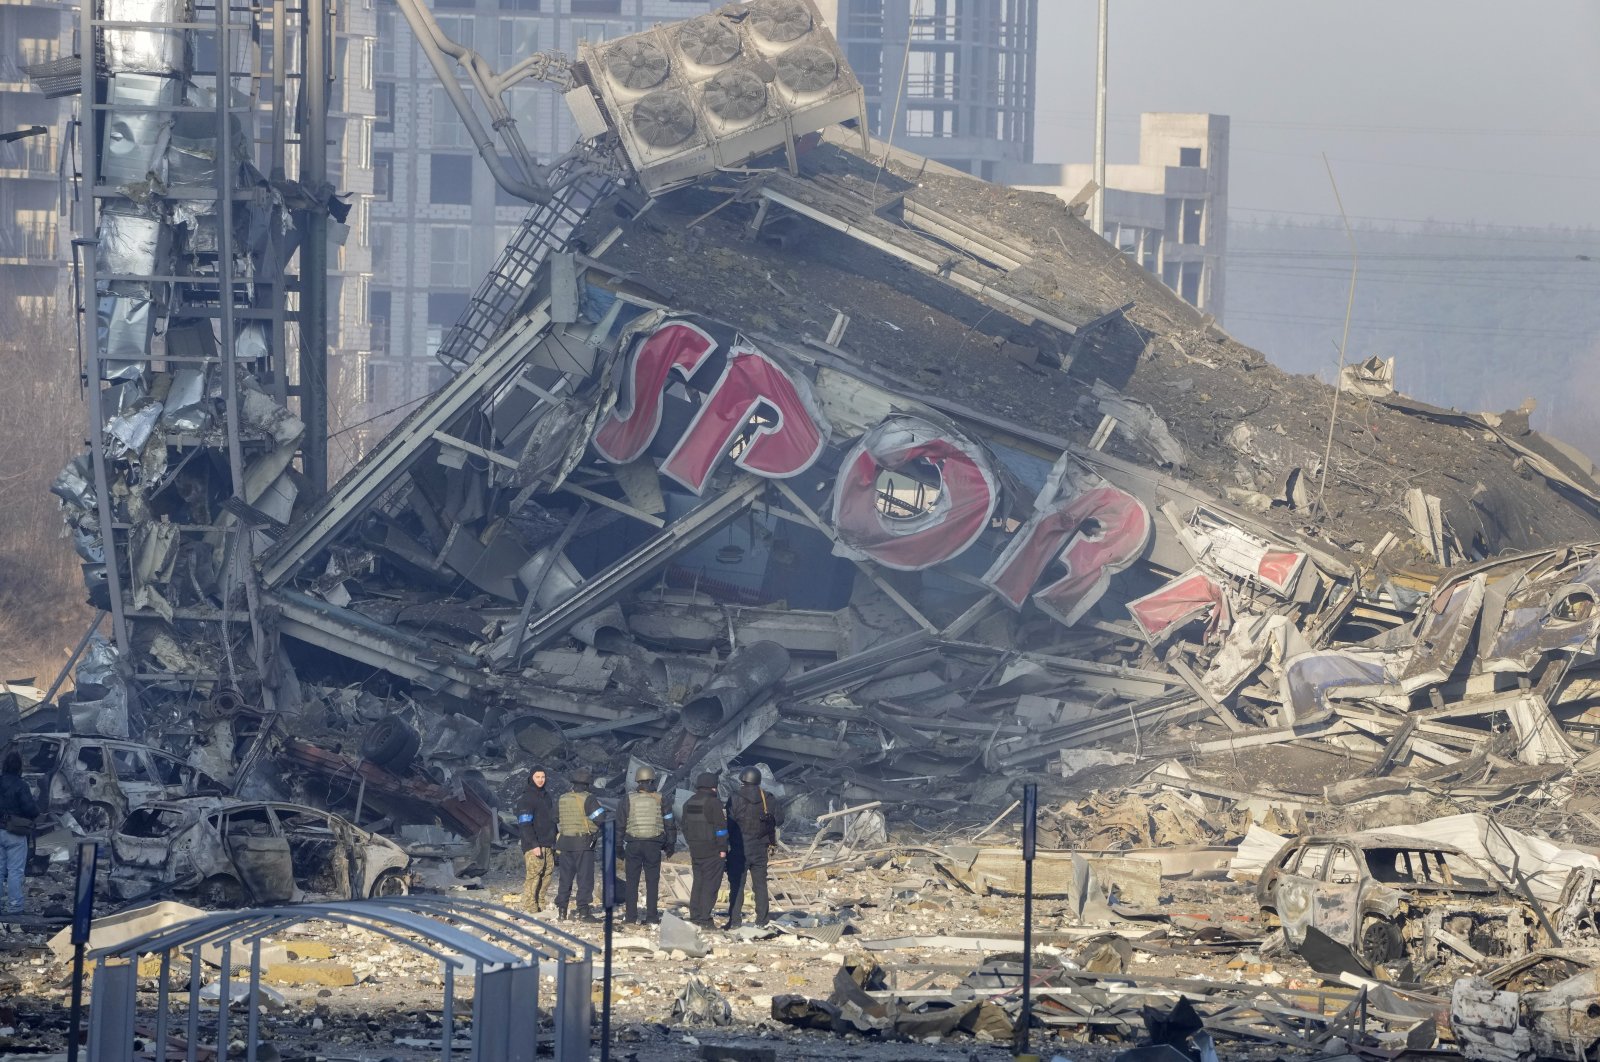 People examine the damage after shelling of a shopping center, in Kyiv, Ukraine, March 21, 2022. (AP Photo)